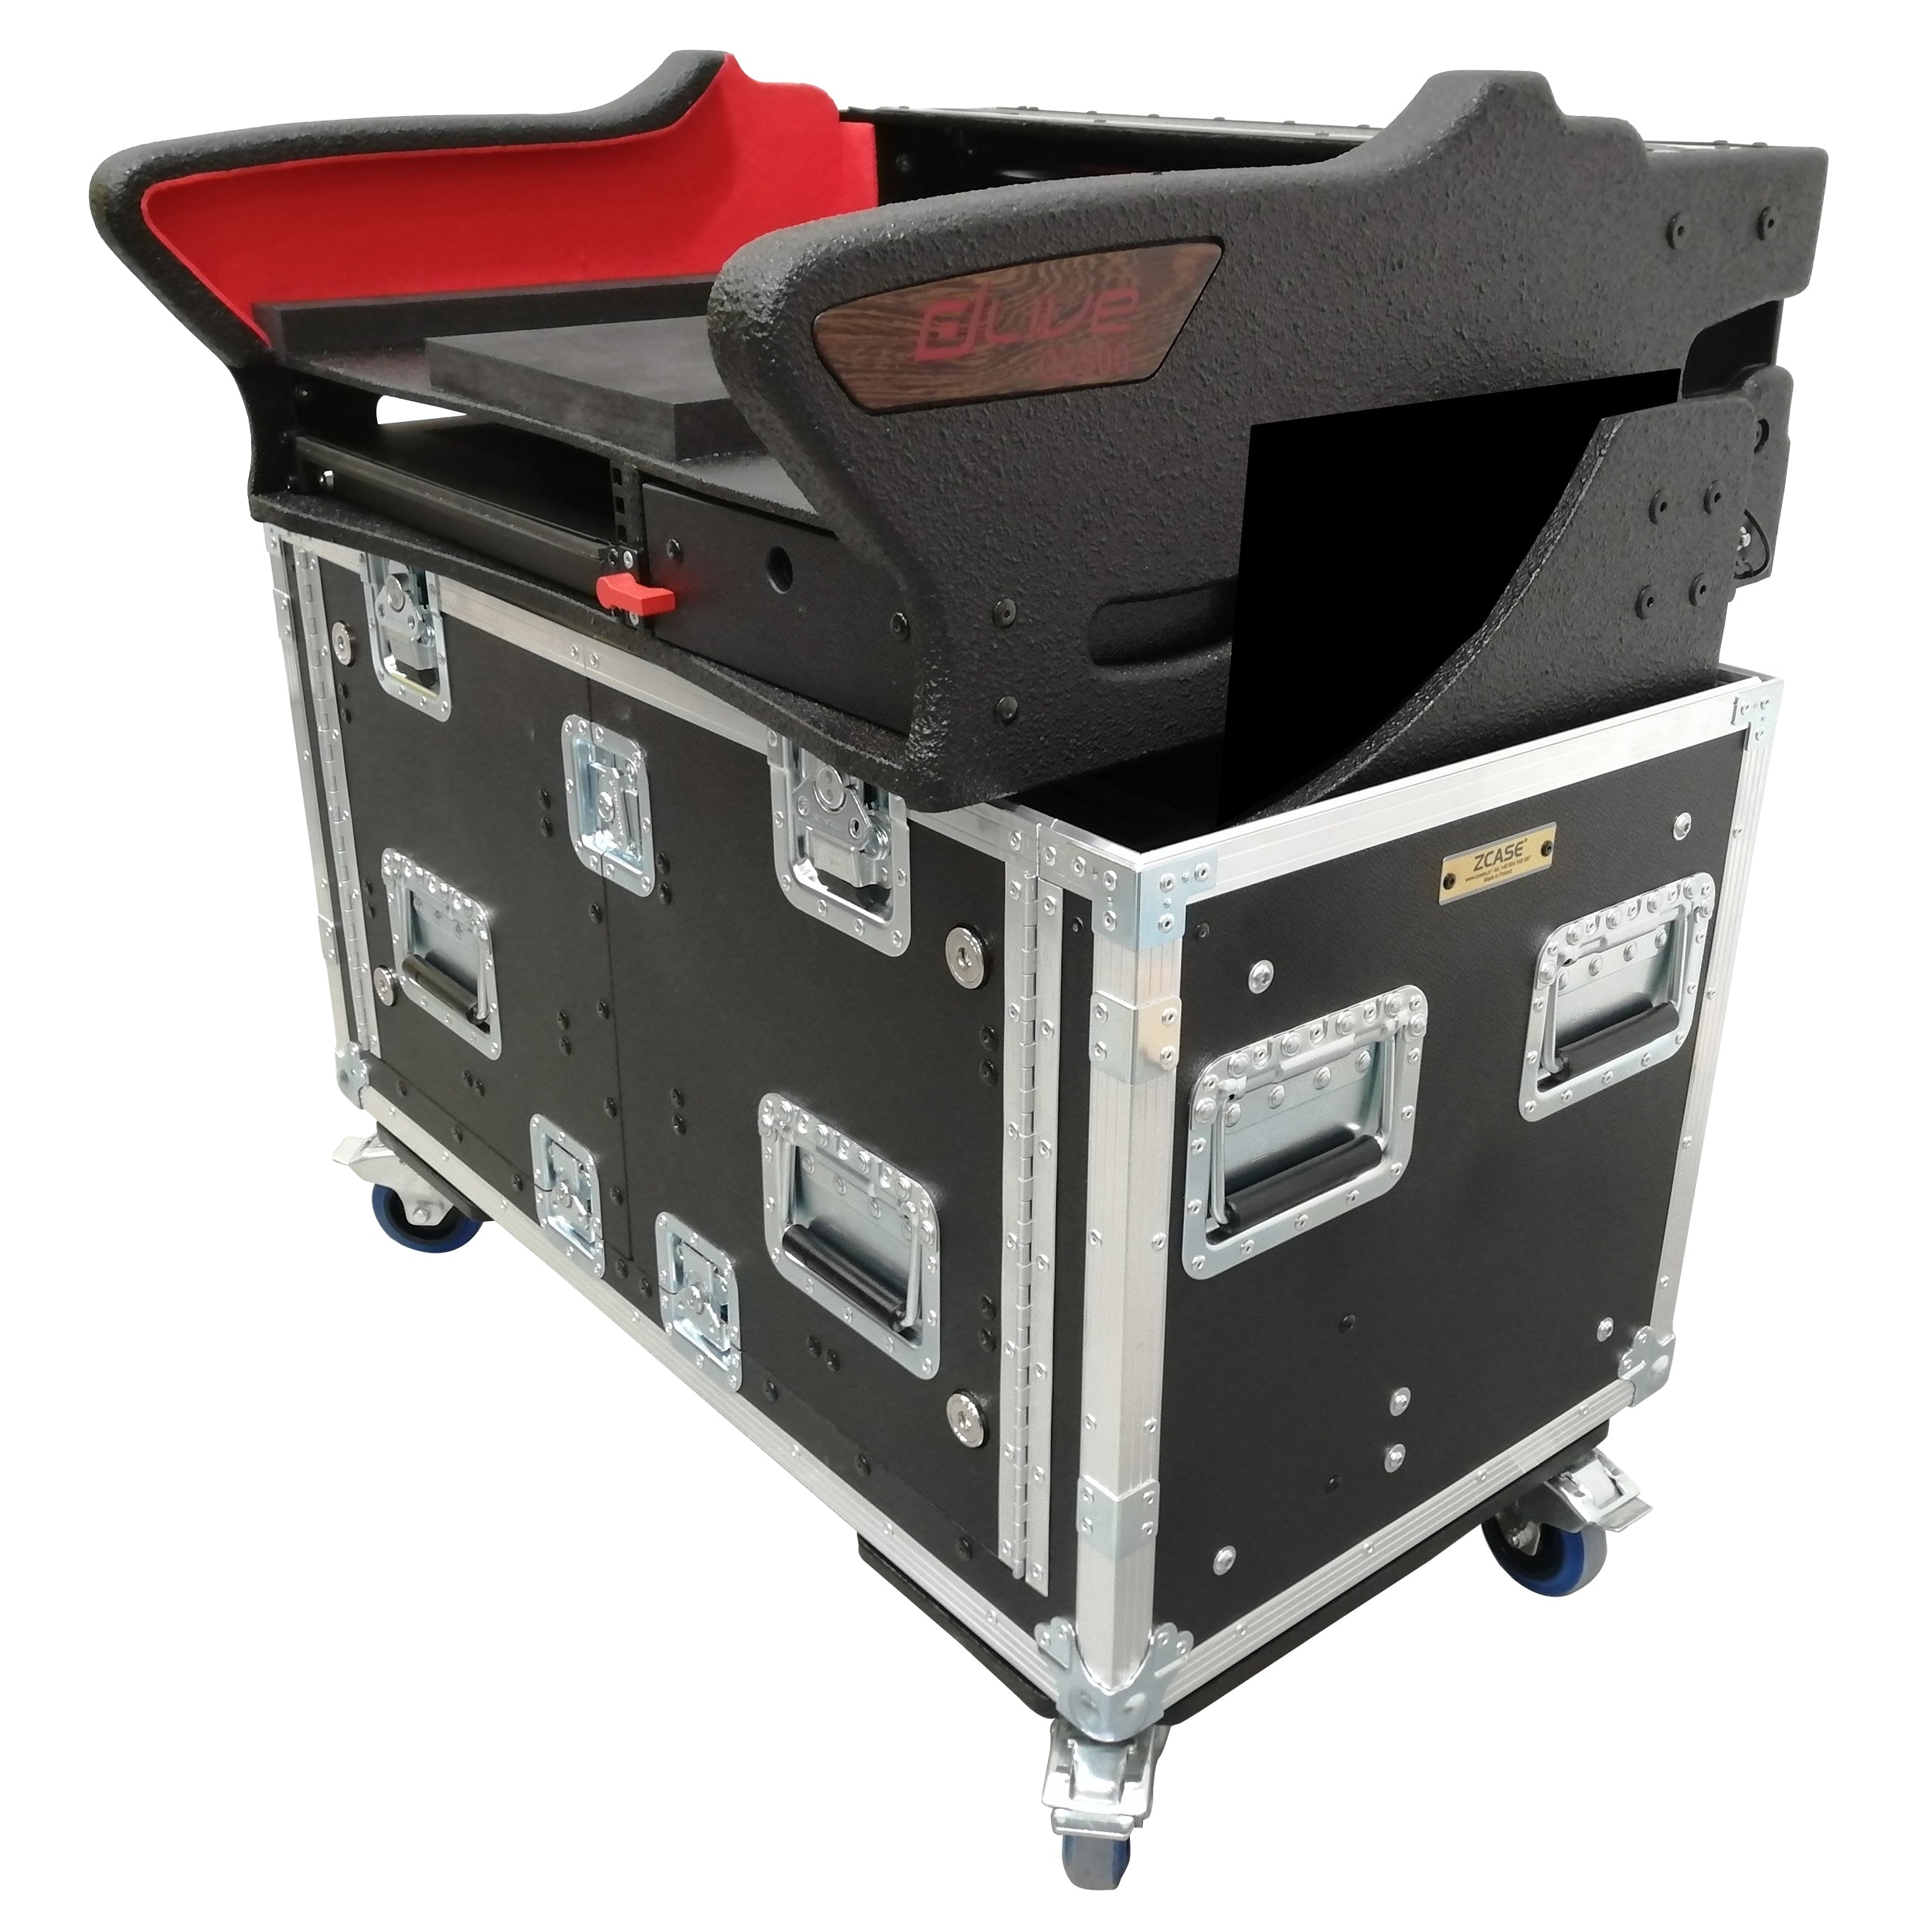 Pro X Flip-Ready Easy Retracting Hydraulic Lift Case for Allen and Heath DLive C2500 Console by ZCase® Custom Order XZF-AHC2500